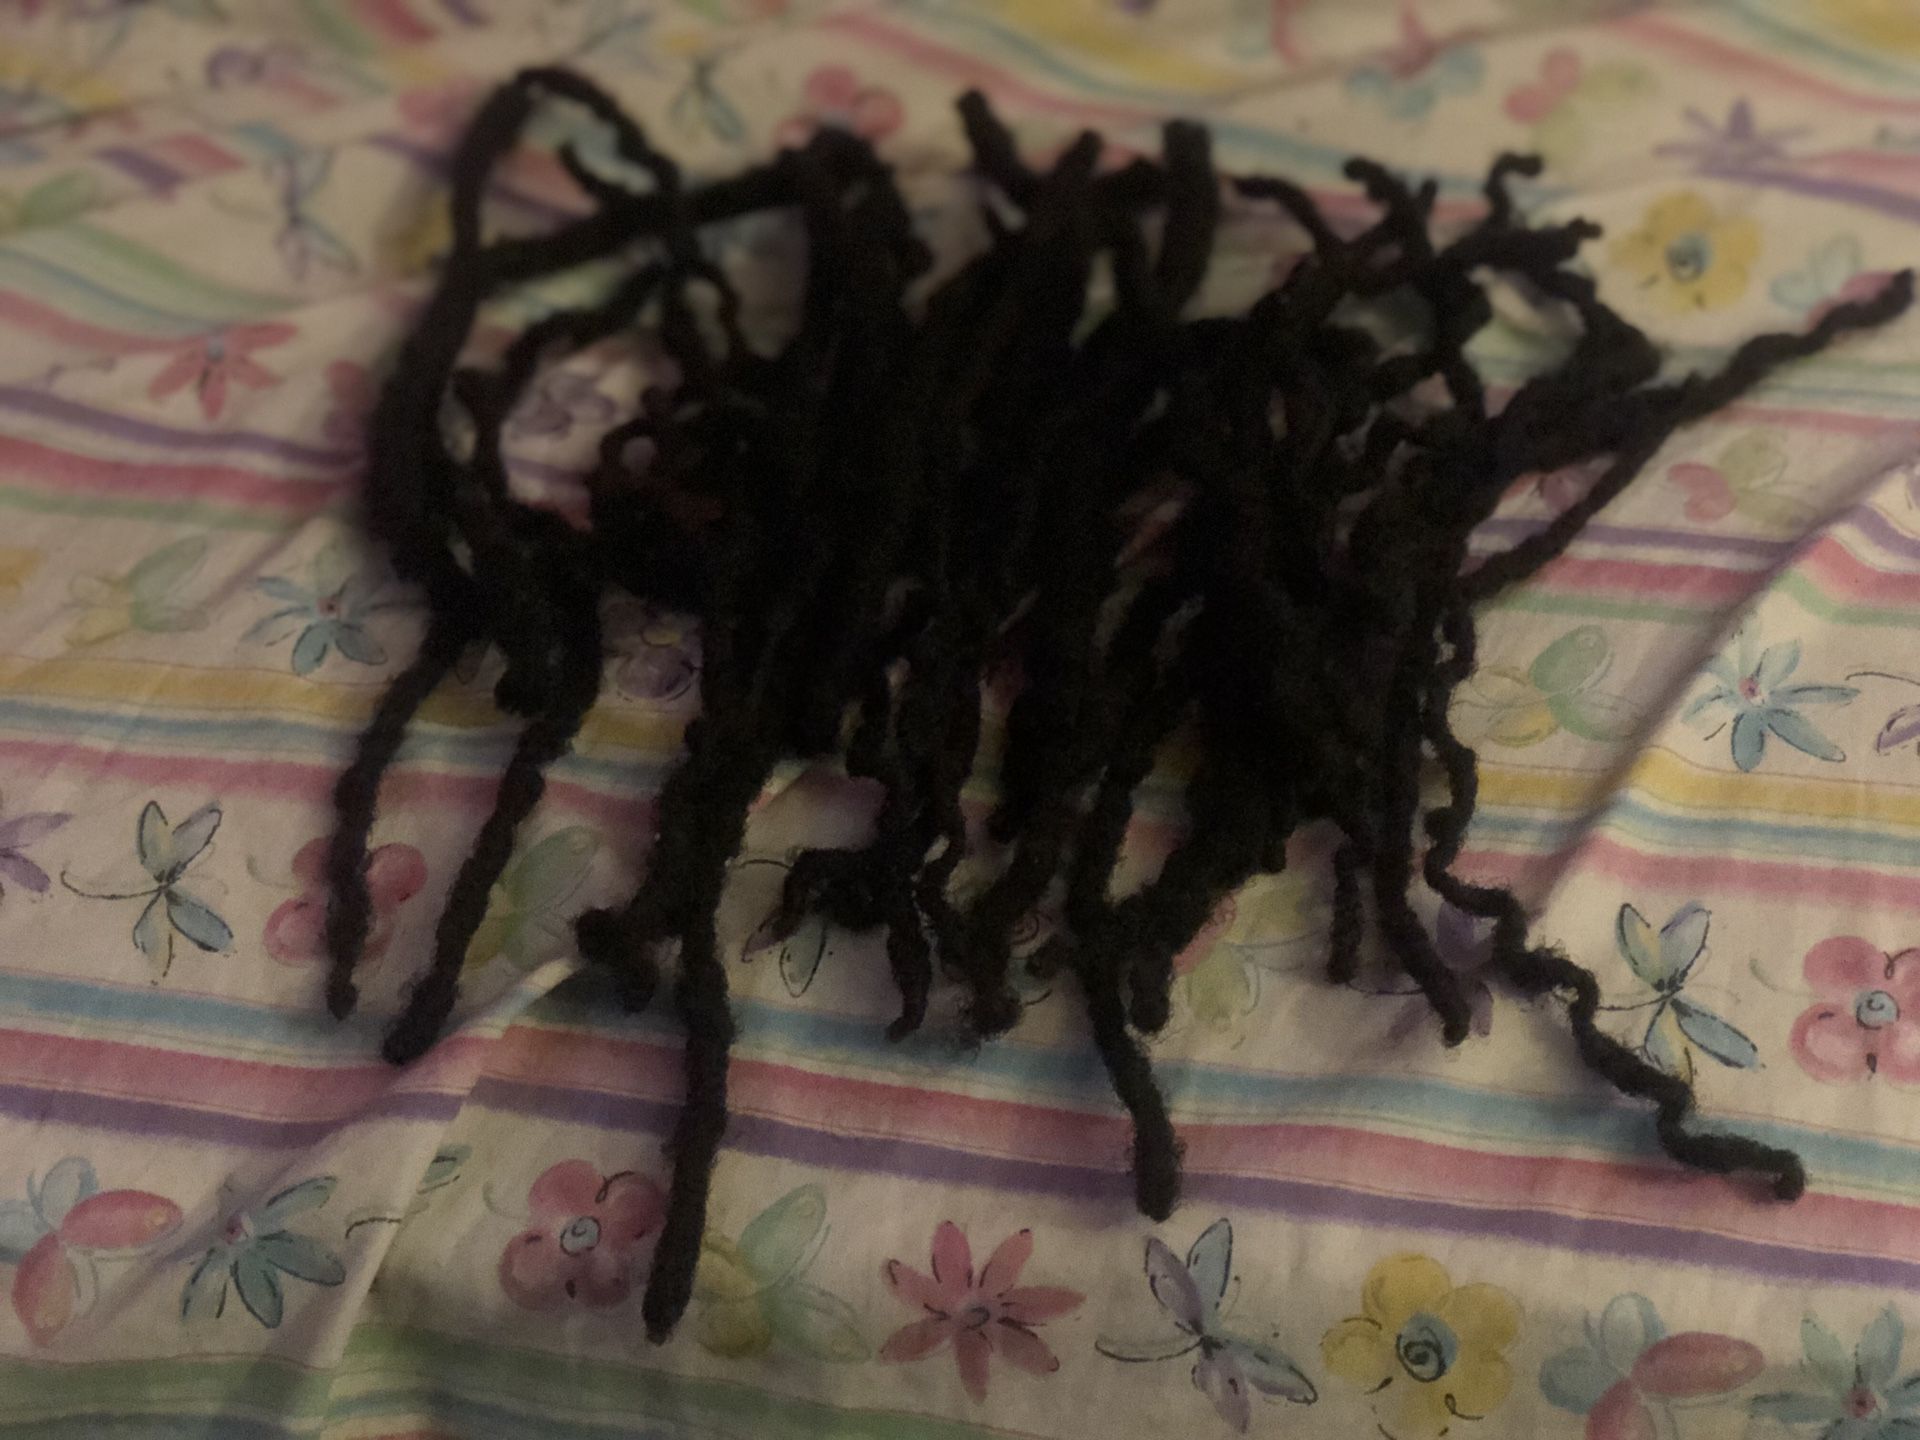 Bundle Of Human Hair Dreads , 29 Dreads For $80 dollars